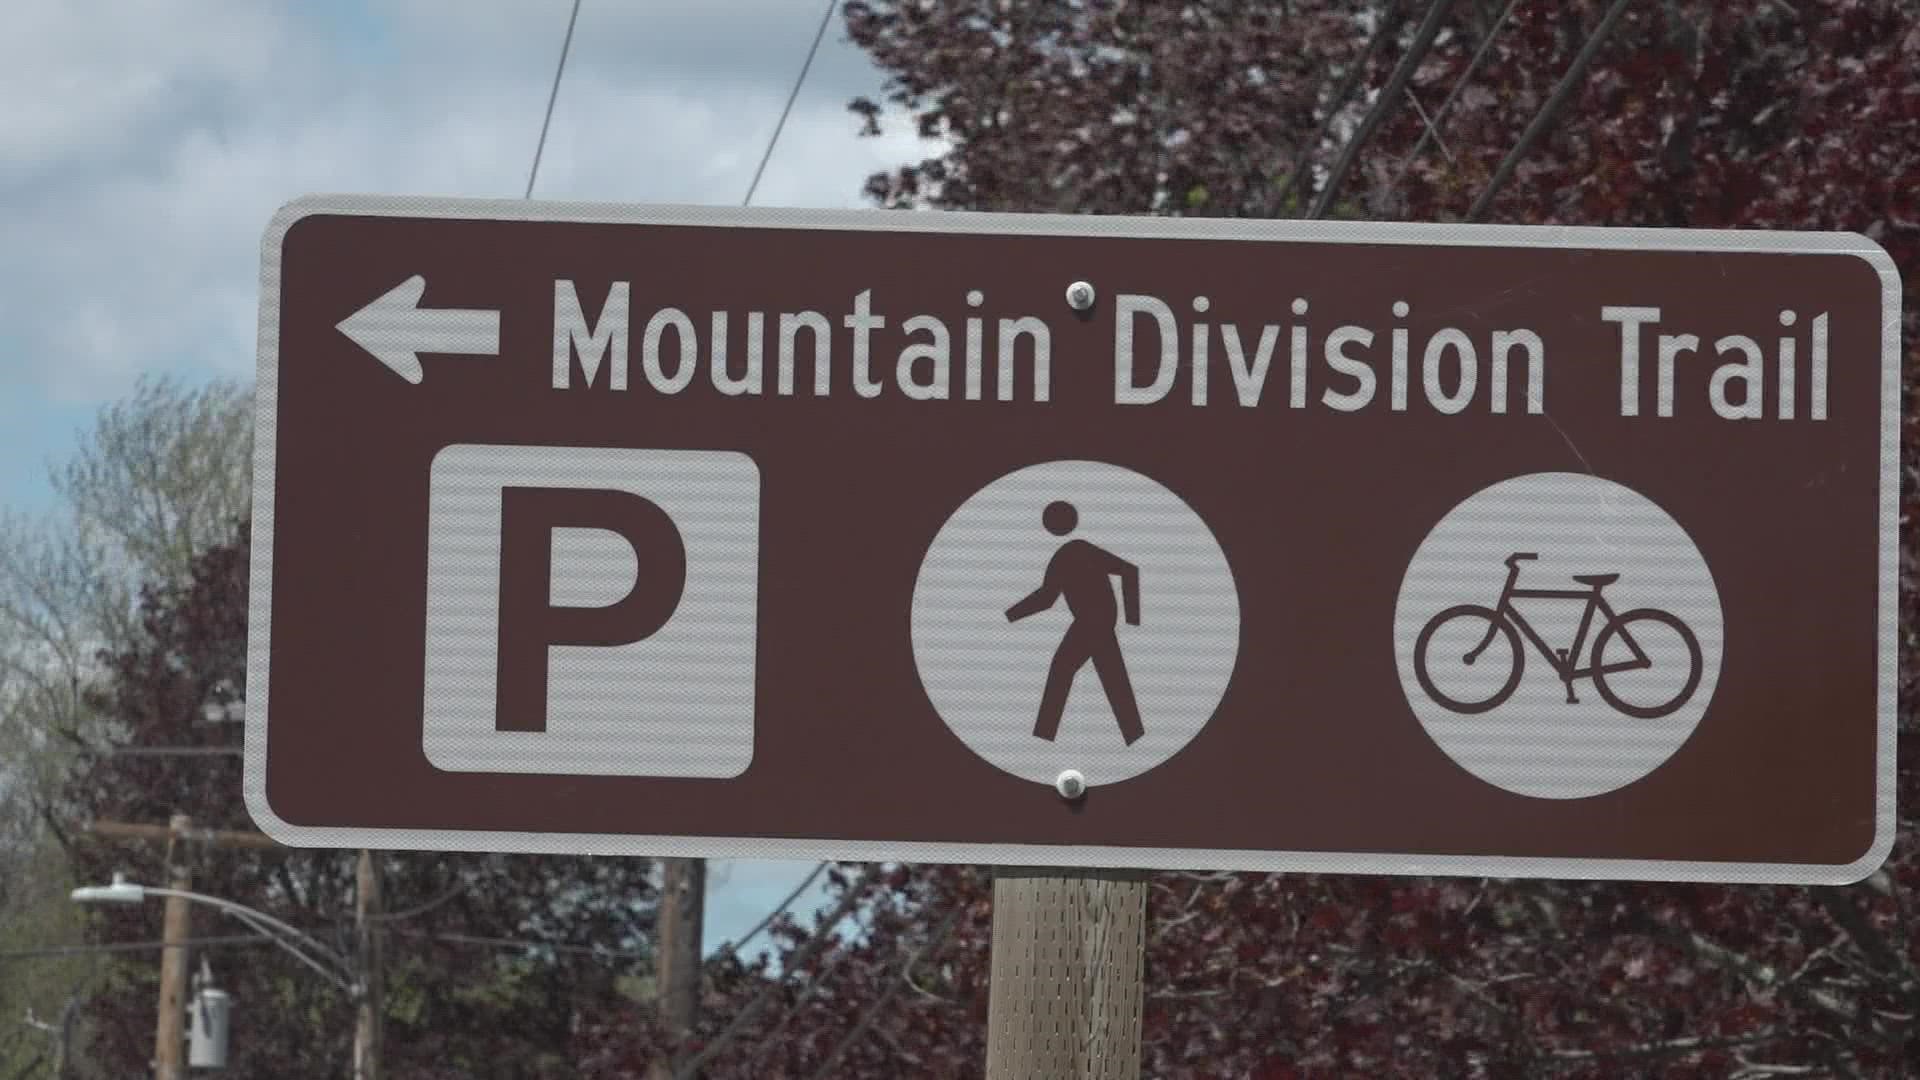 The Mountain Division Alliance wants to build a biking and walking trail on or alongside mostly-dormant railroad tracks from Fryeburg to Portland.